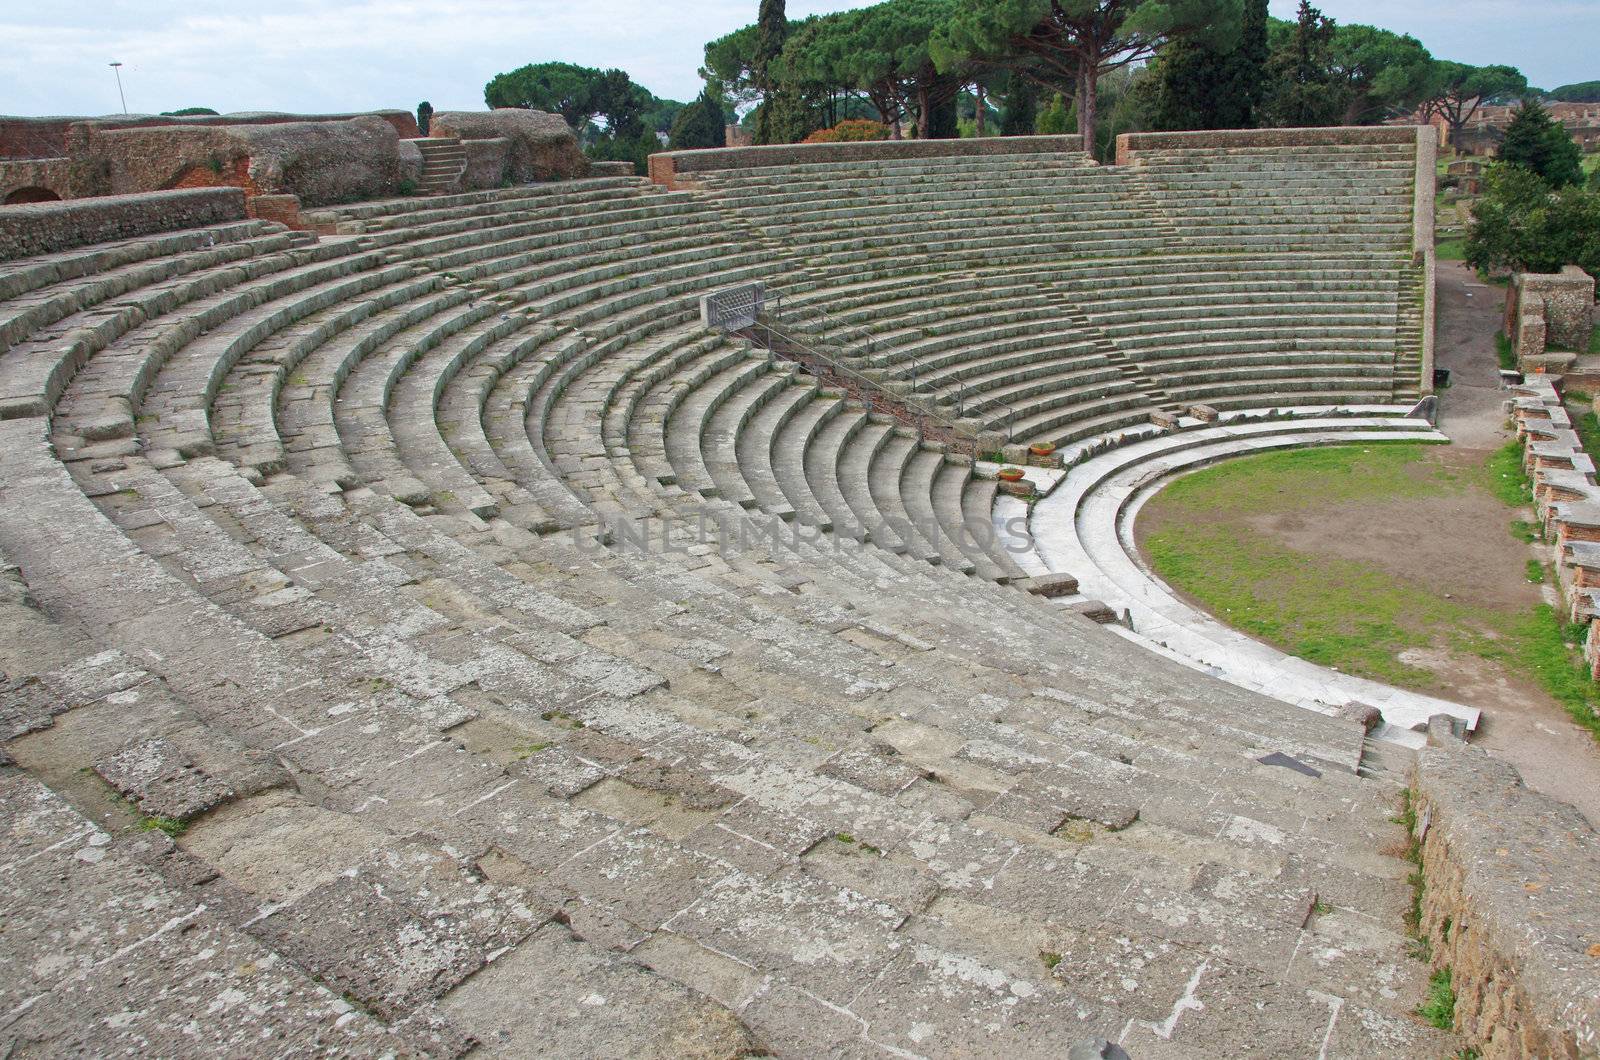 Ancient theater at Ostia Antica, near Rome